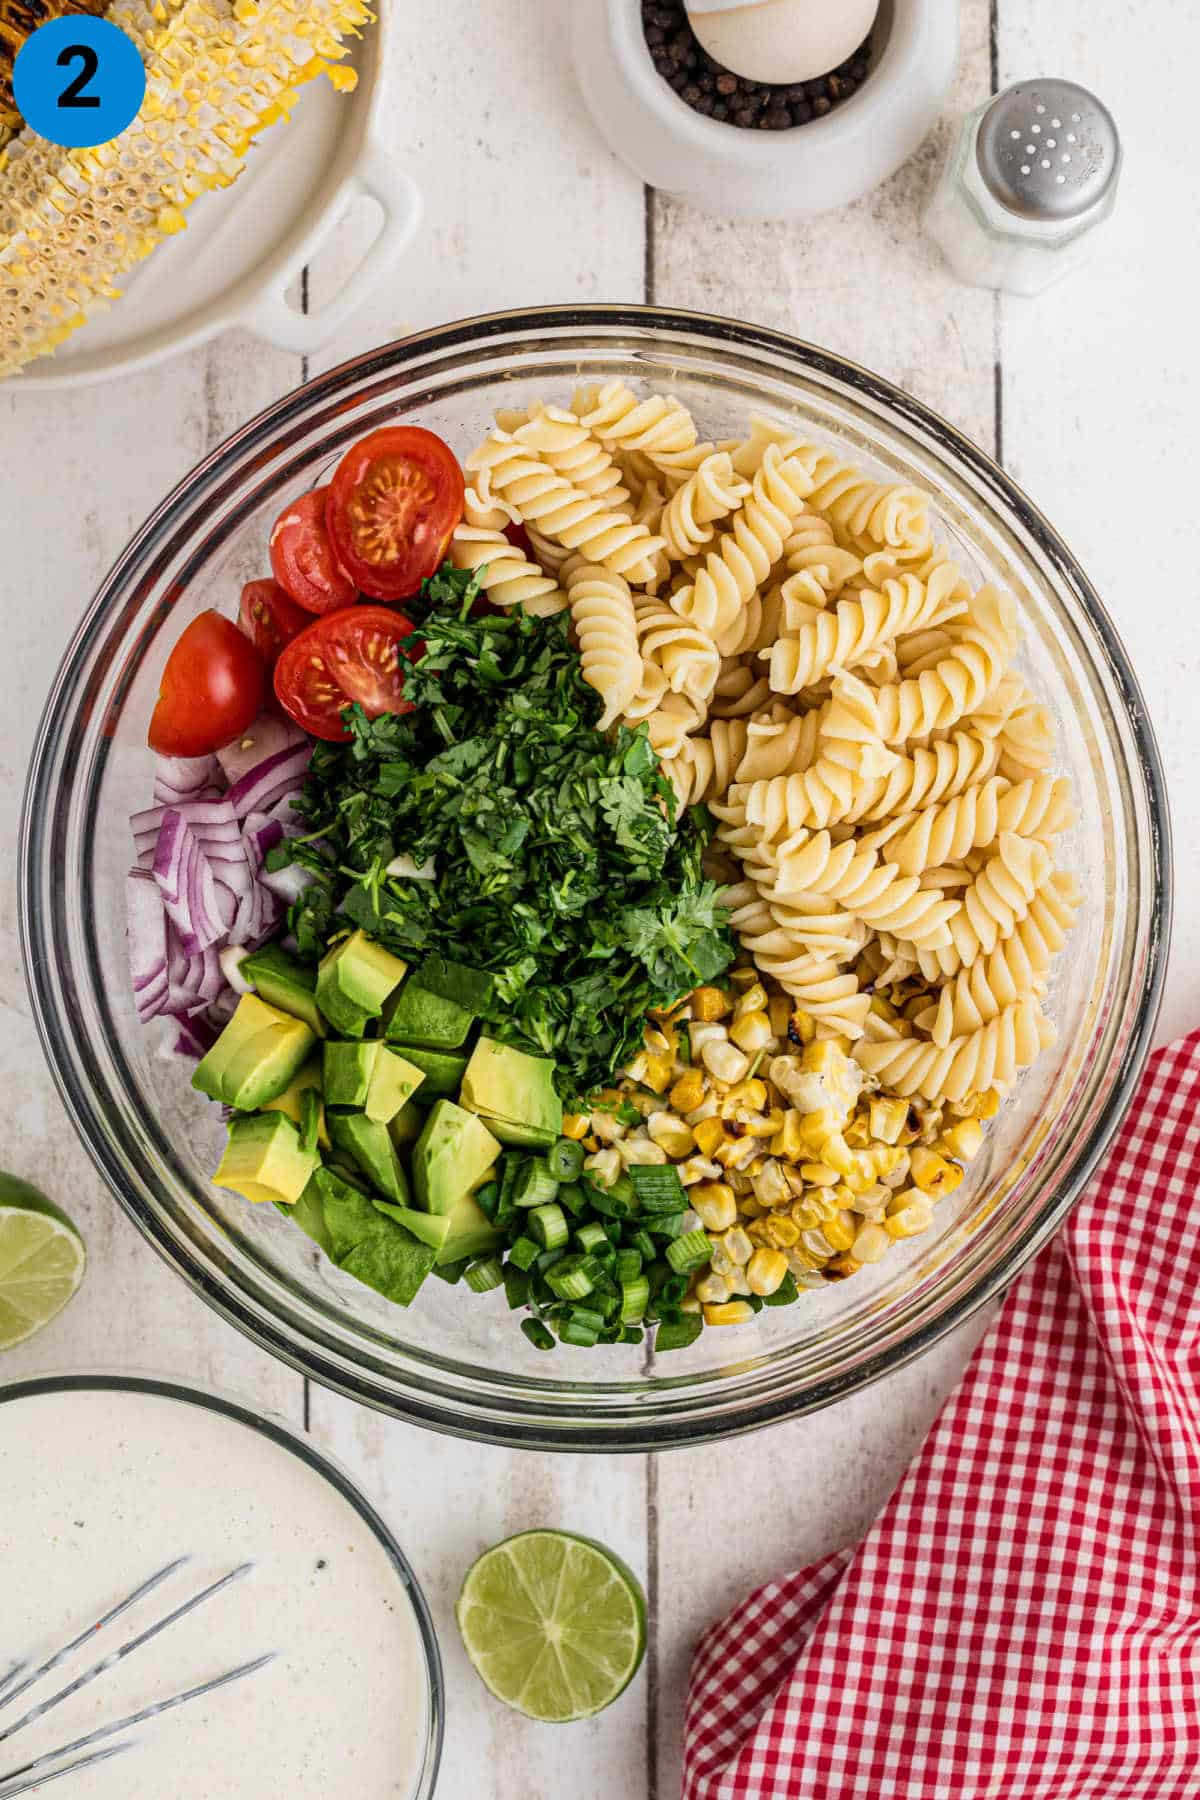 A large salad bowl with the ingredients needed arranged, to show what's needed for this pasta salad recipe.